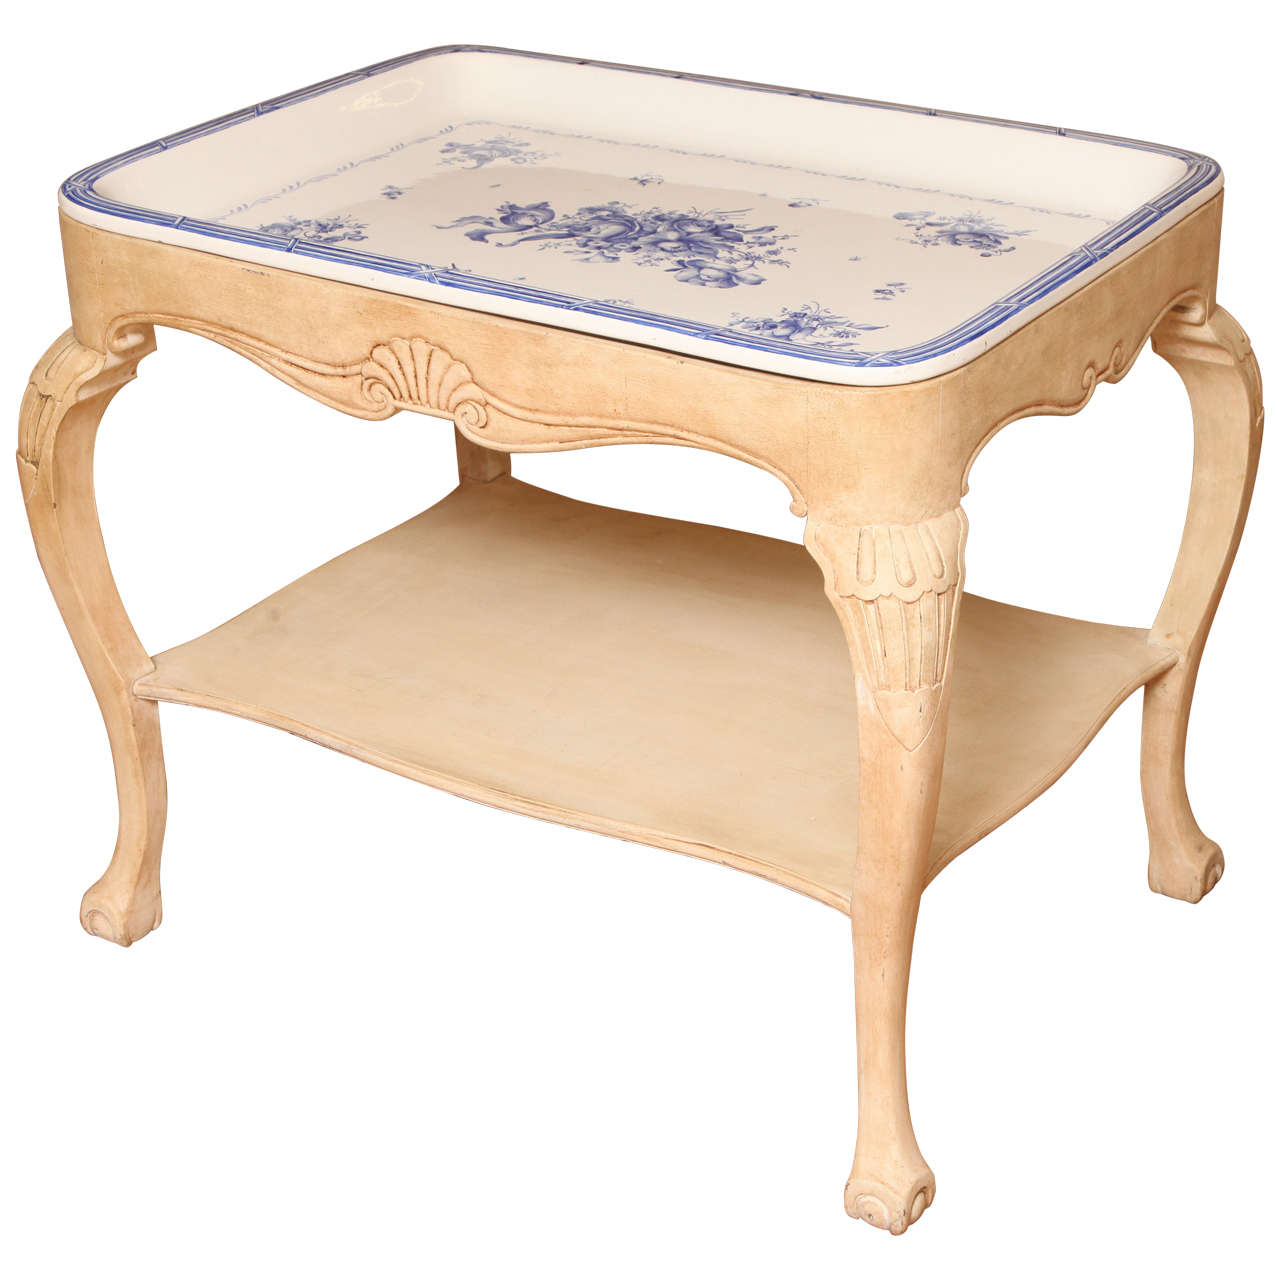 Swedish Rörstrand Blue and White Porcelain Tray Table